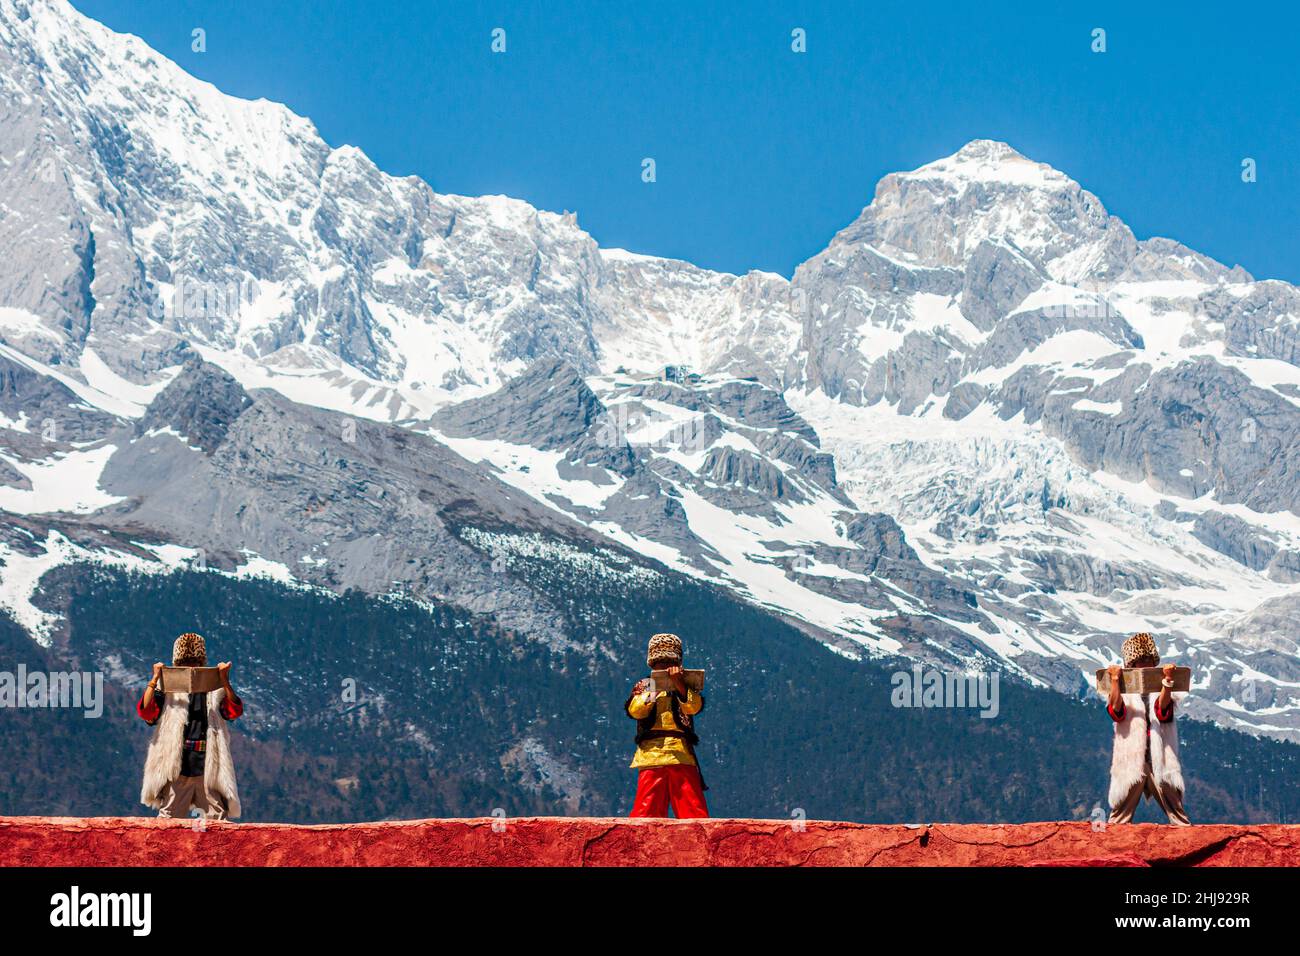 The ethnic minority of the Naxi people in their traditional costumes; scene from a performance with the Jade Dragon Snow Mountain in the background Stock Photo